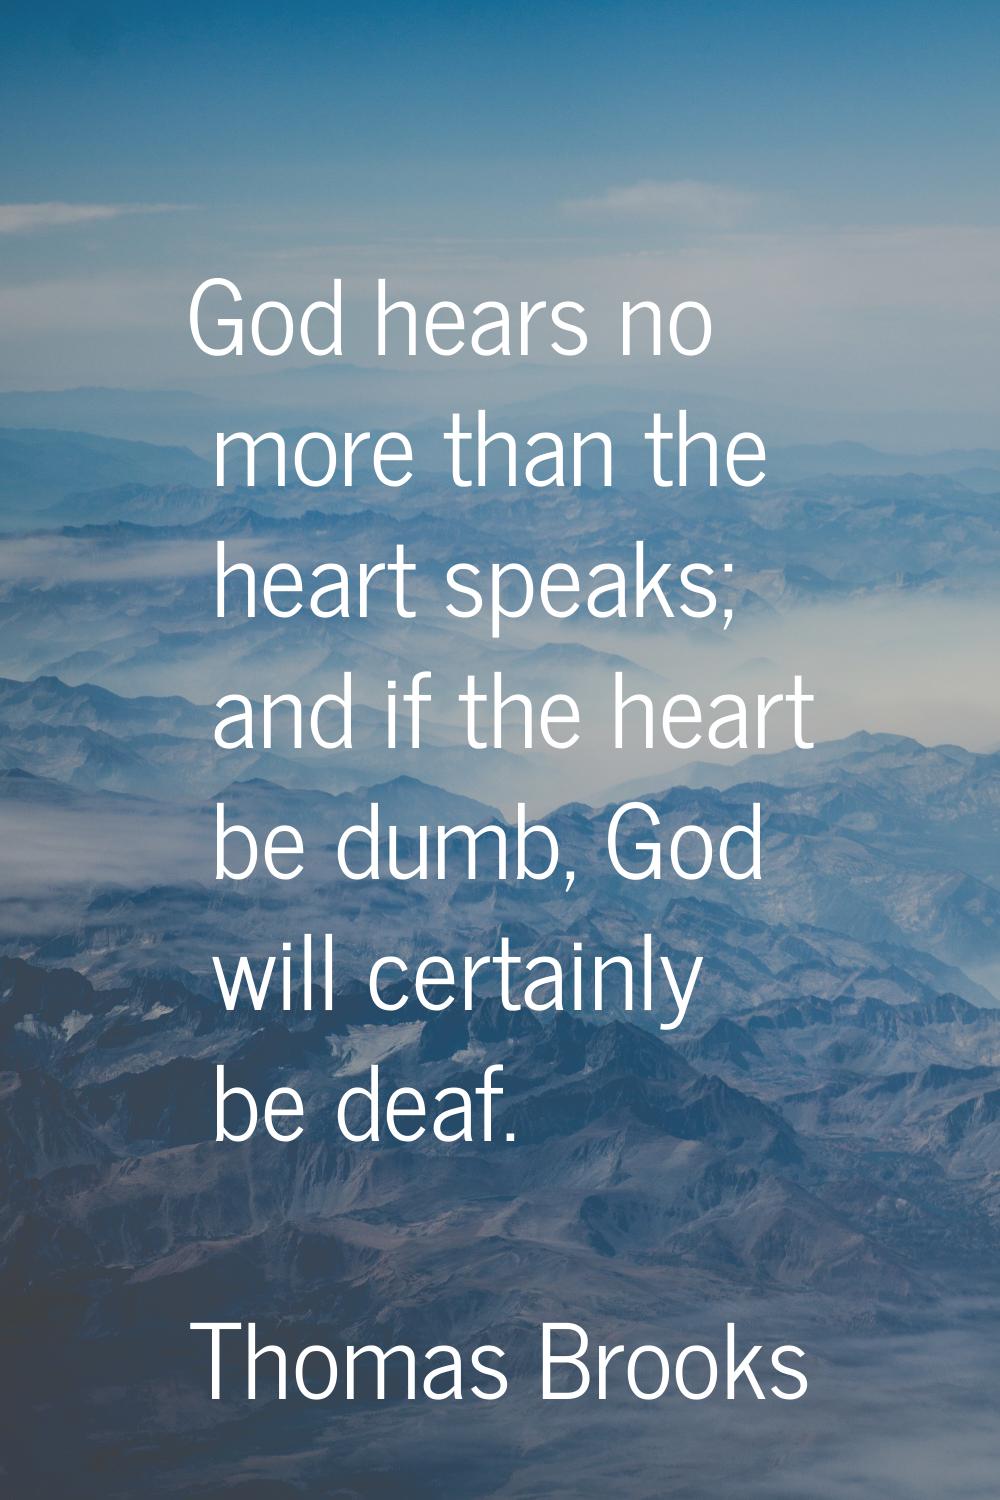 God hears no more than the heart speaks; and if the heart be dumb, God will certainly be deaf.